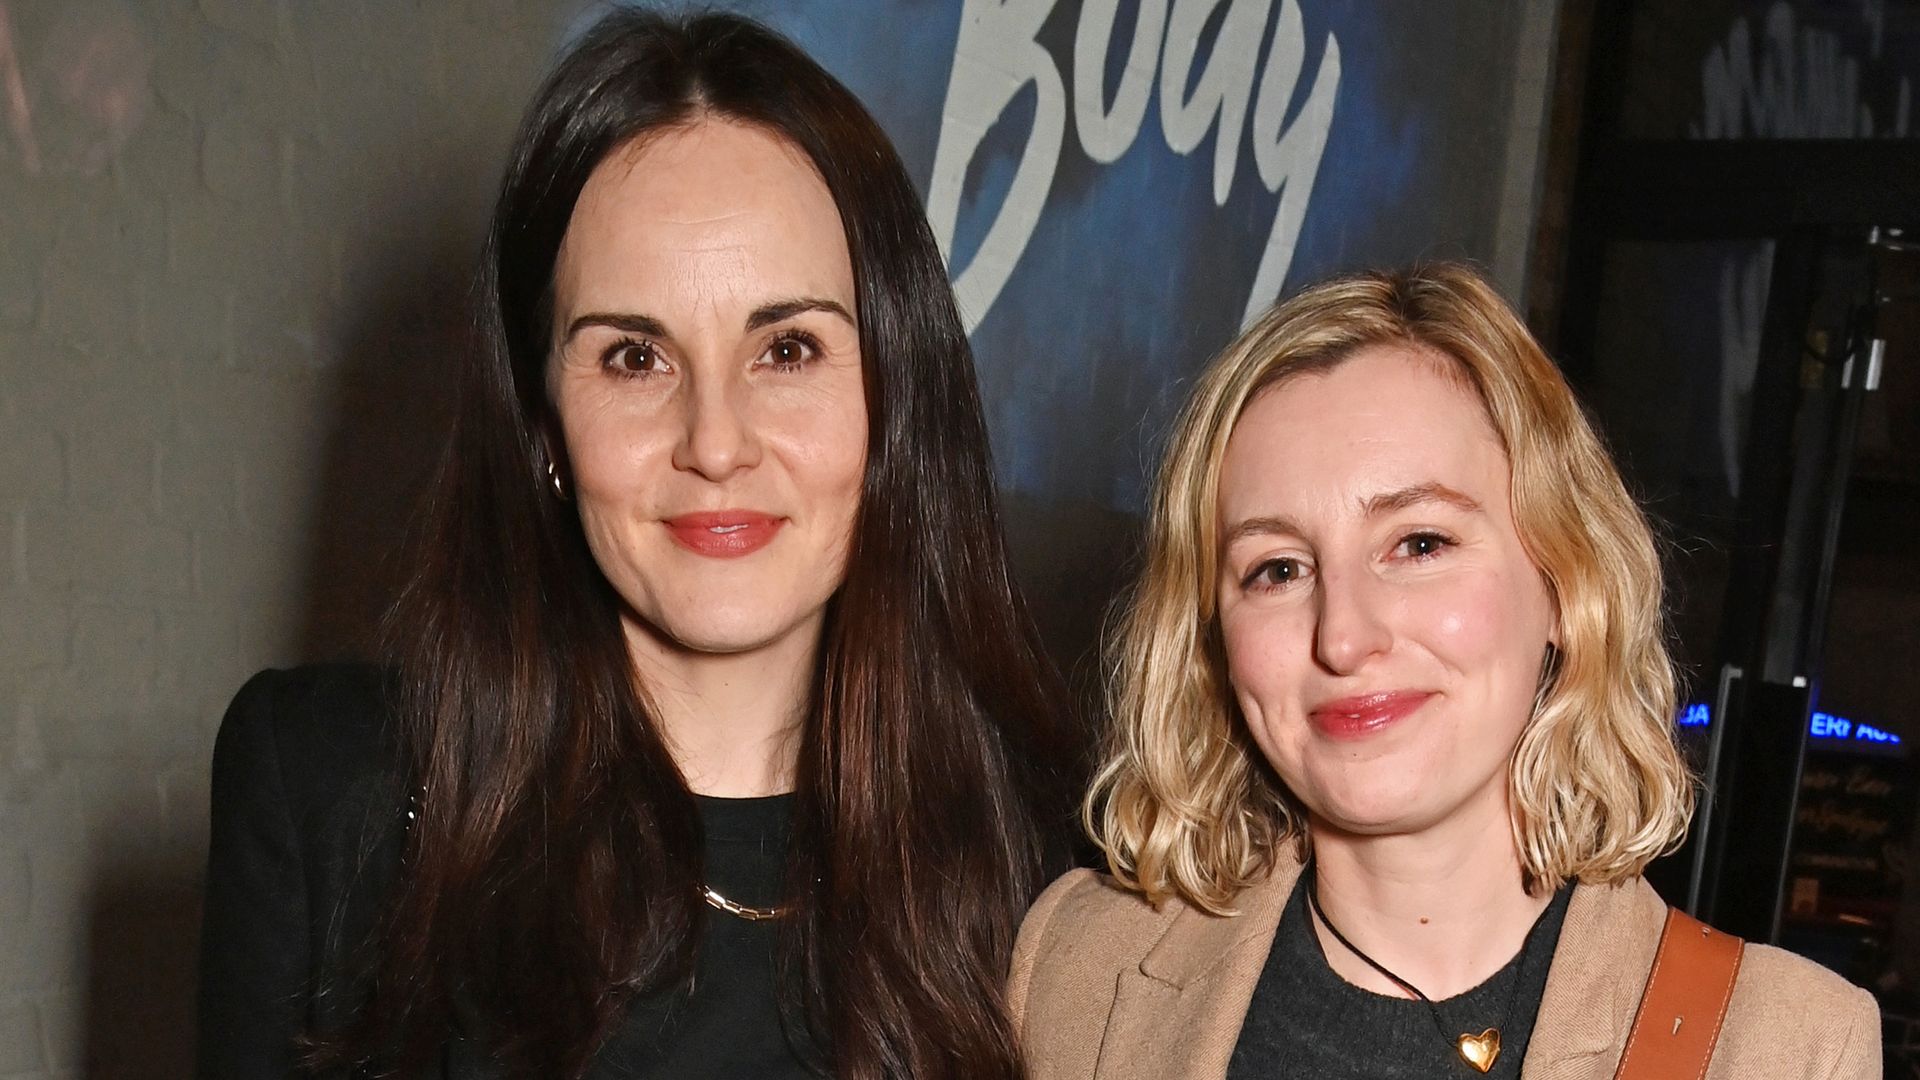 Downton Abbey's Michelle Dockery reunites with on-screen sister Laura Carmichael at star-studded event